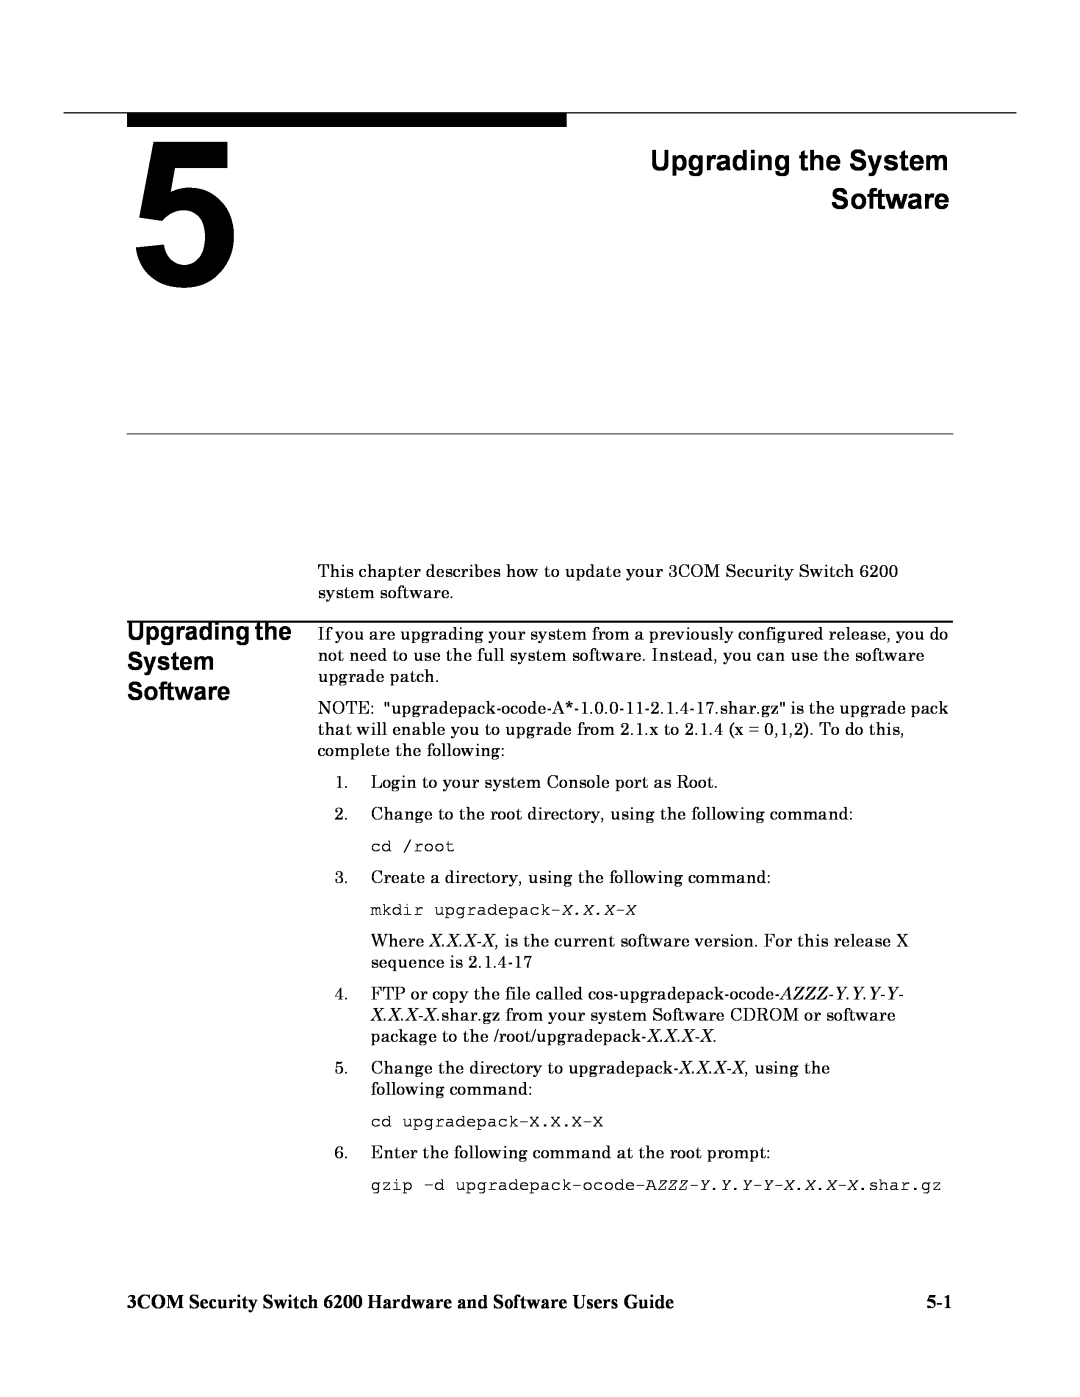 3Com manual Upgrading the System Software, 3COM Security Switch 6200 Hardware and Software Users Guide 